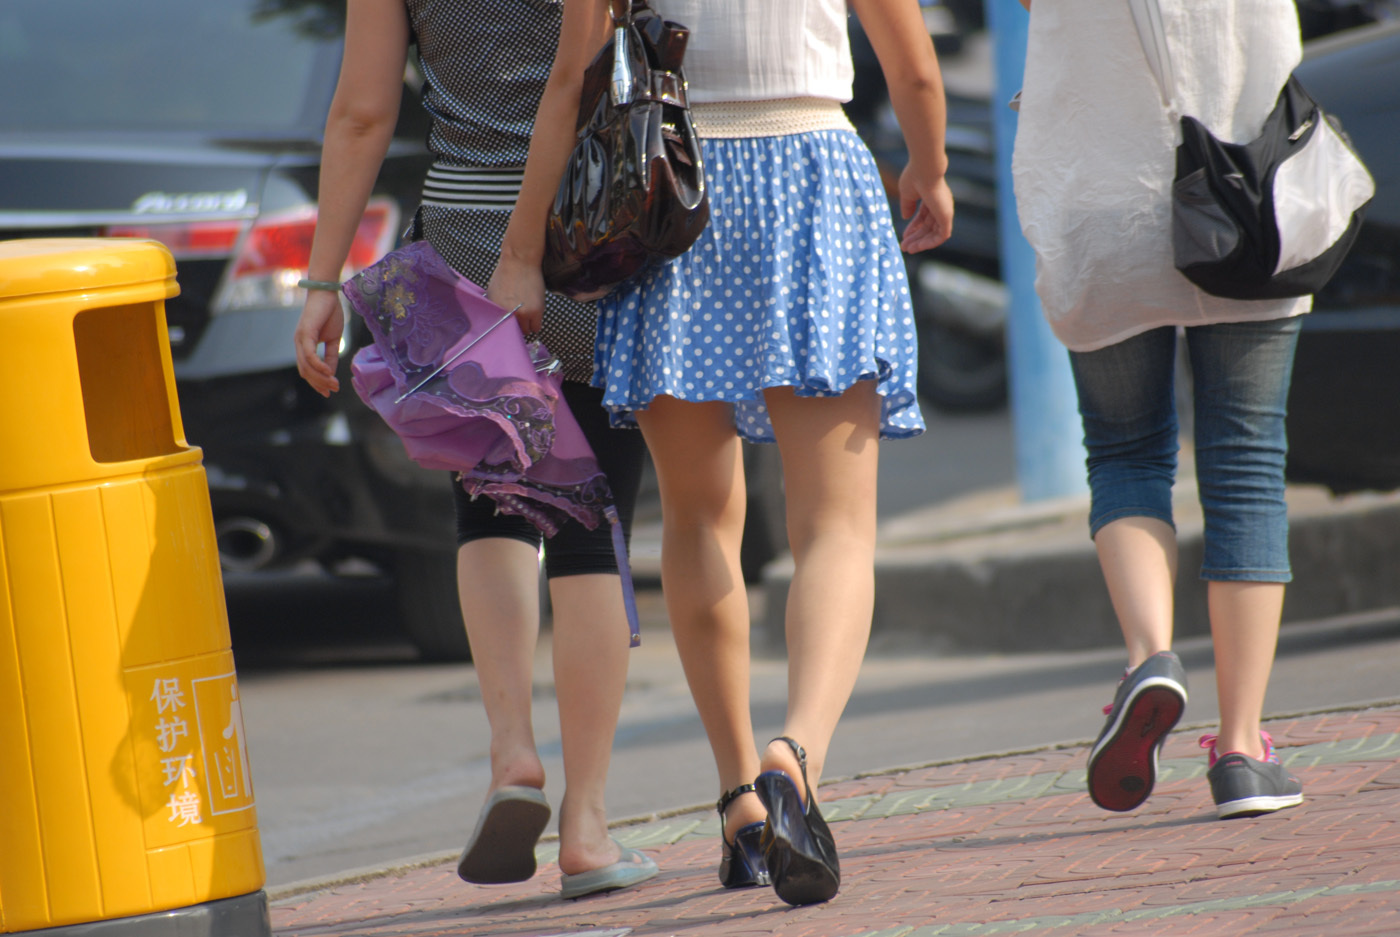 [outdoor Street Photo] on August 5, 2013, I followed her for a long time and finally showed up